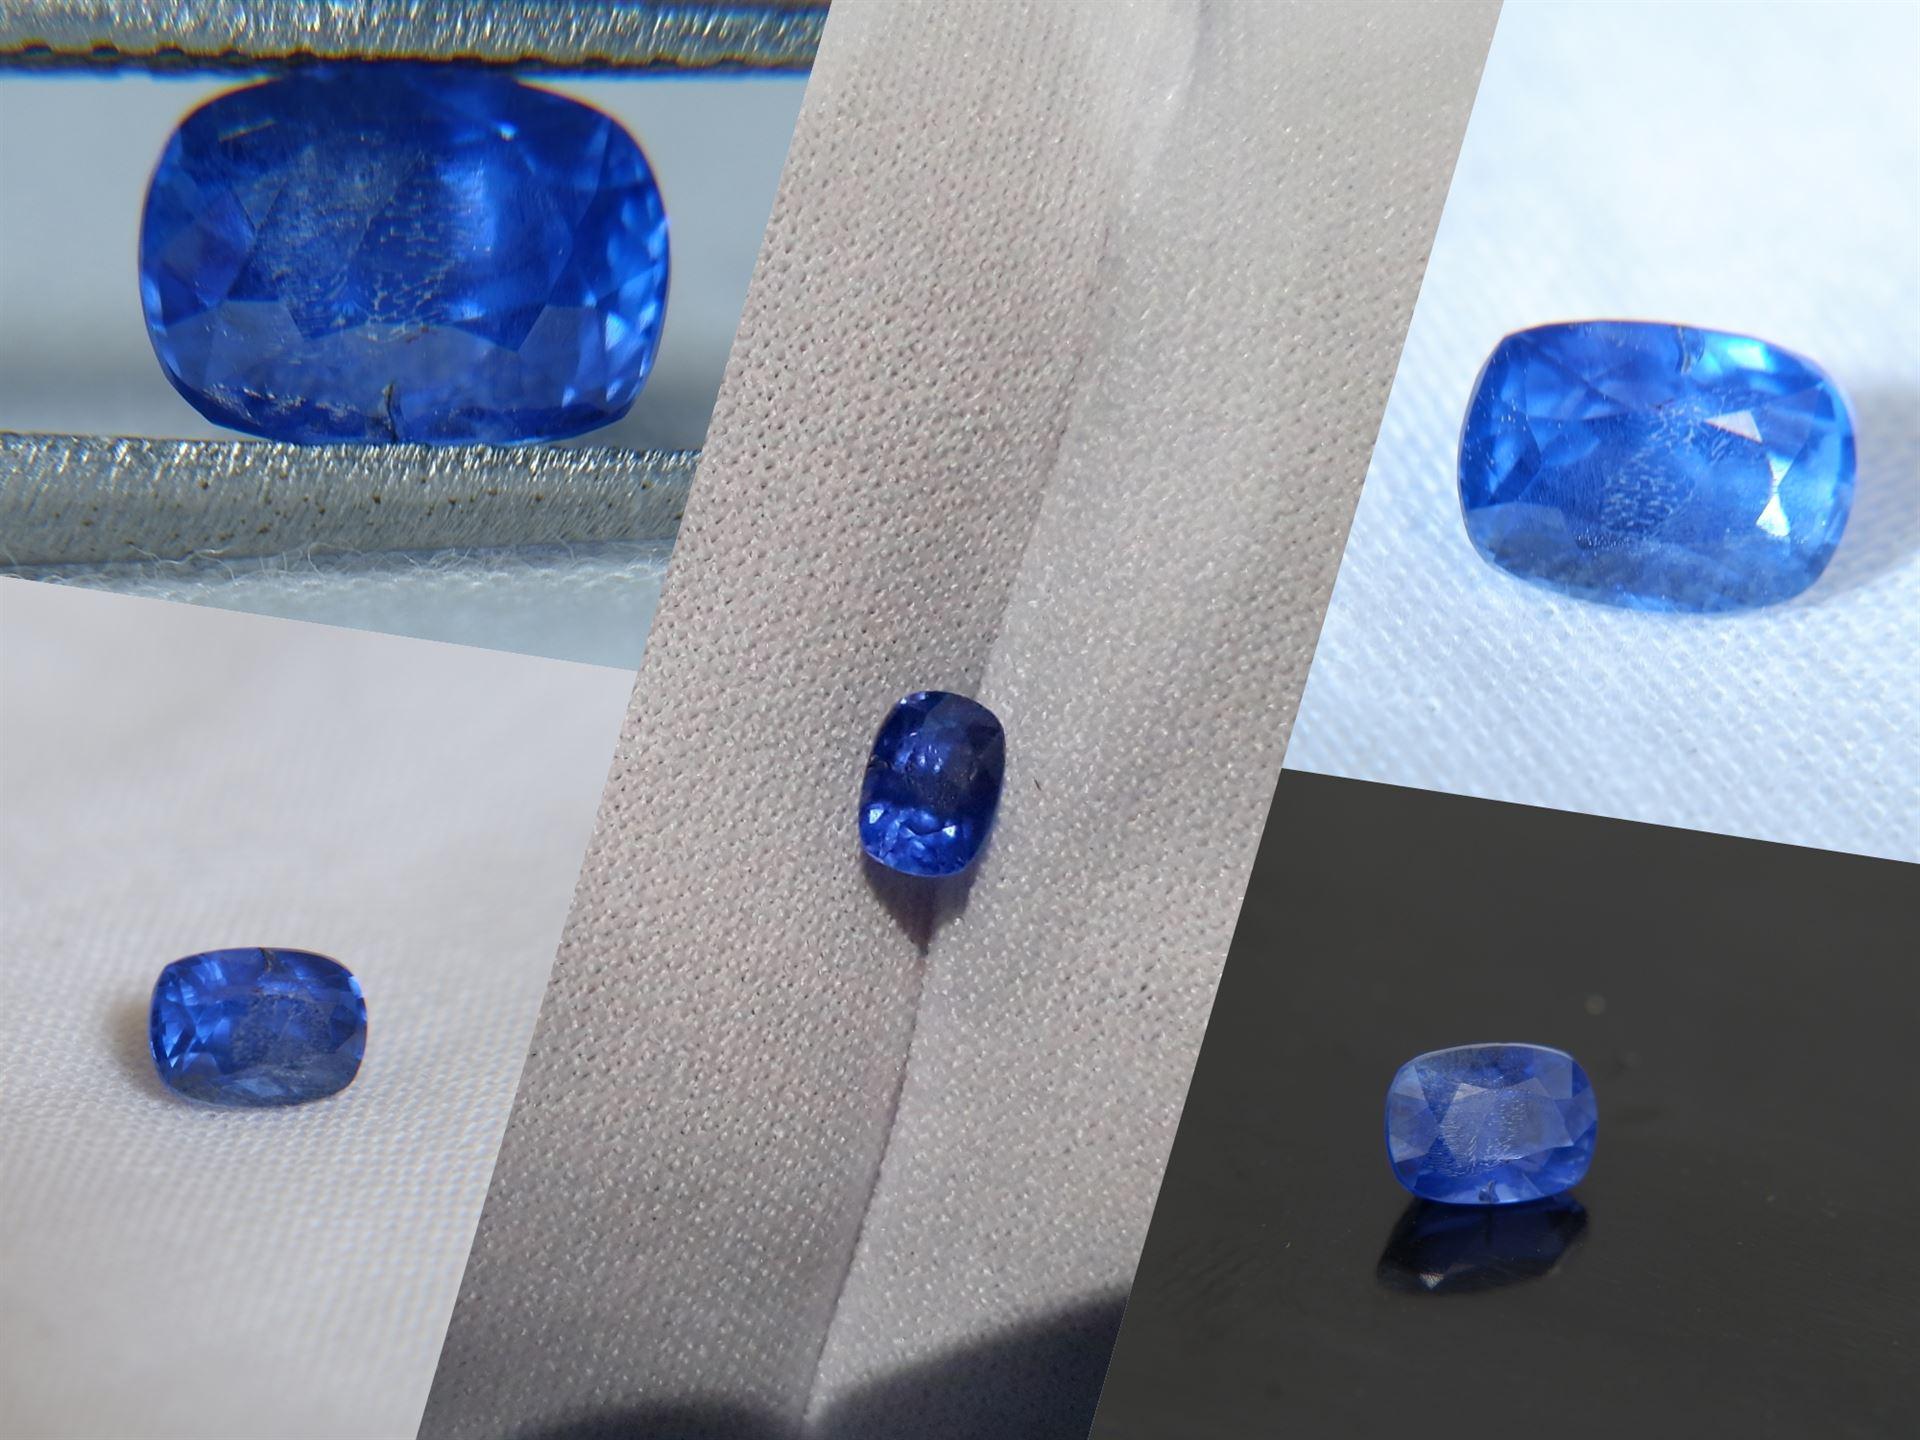 GEMSTONE TYPE: Unheated Sri Lanka Ceylon sapphire
RECOMMENDED JEWELRY SETTINGS: Solitaire Ring, Women Rings, Sapphire solitaire, Bracelets
CERTIFICATE: CSL/GIA Full Lab Report included
ORIGIN: Sri Lanka
CARAT SIZE: 1.13
DIMENSIONS: Length 6.60 x